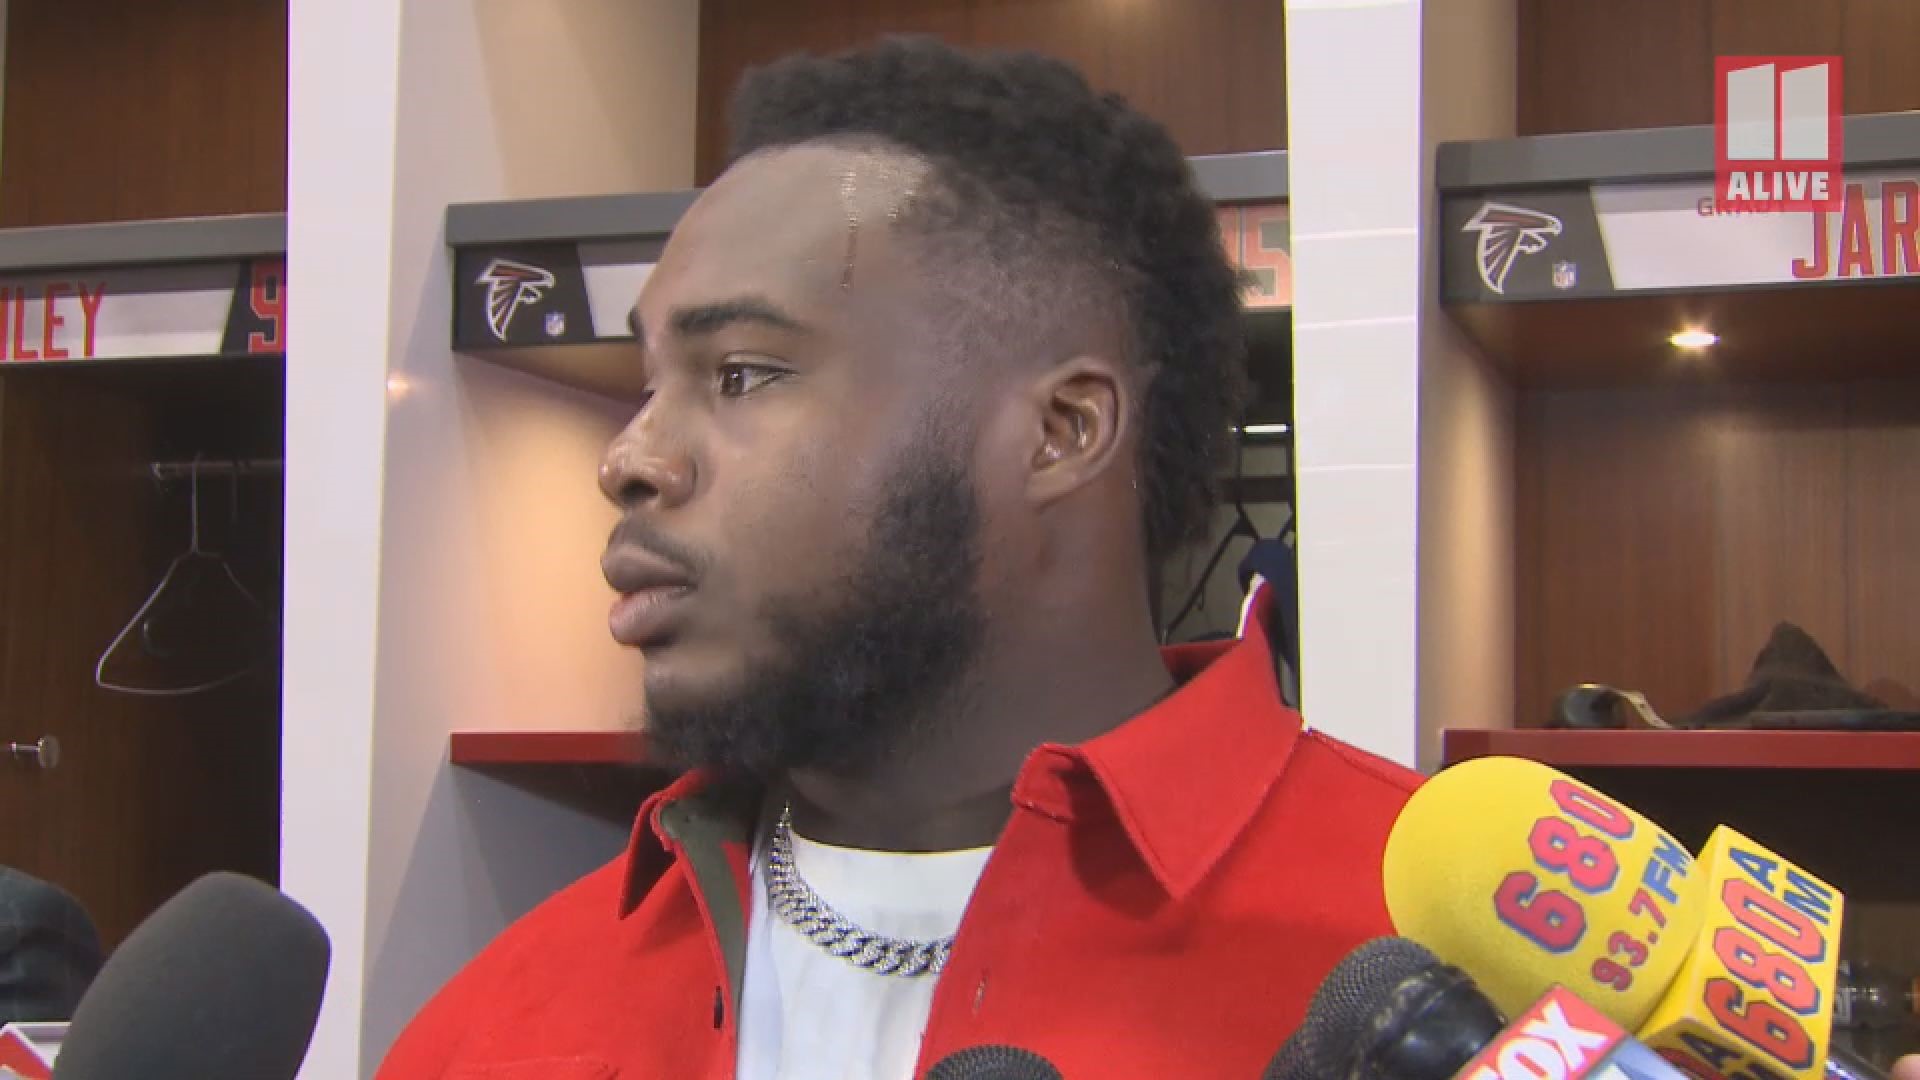 The Falcons' defensive tackle spoke to 11Alive Sports in the locker room after the team's loss to Tampa Bay, Sunday.